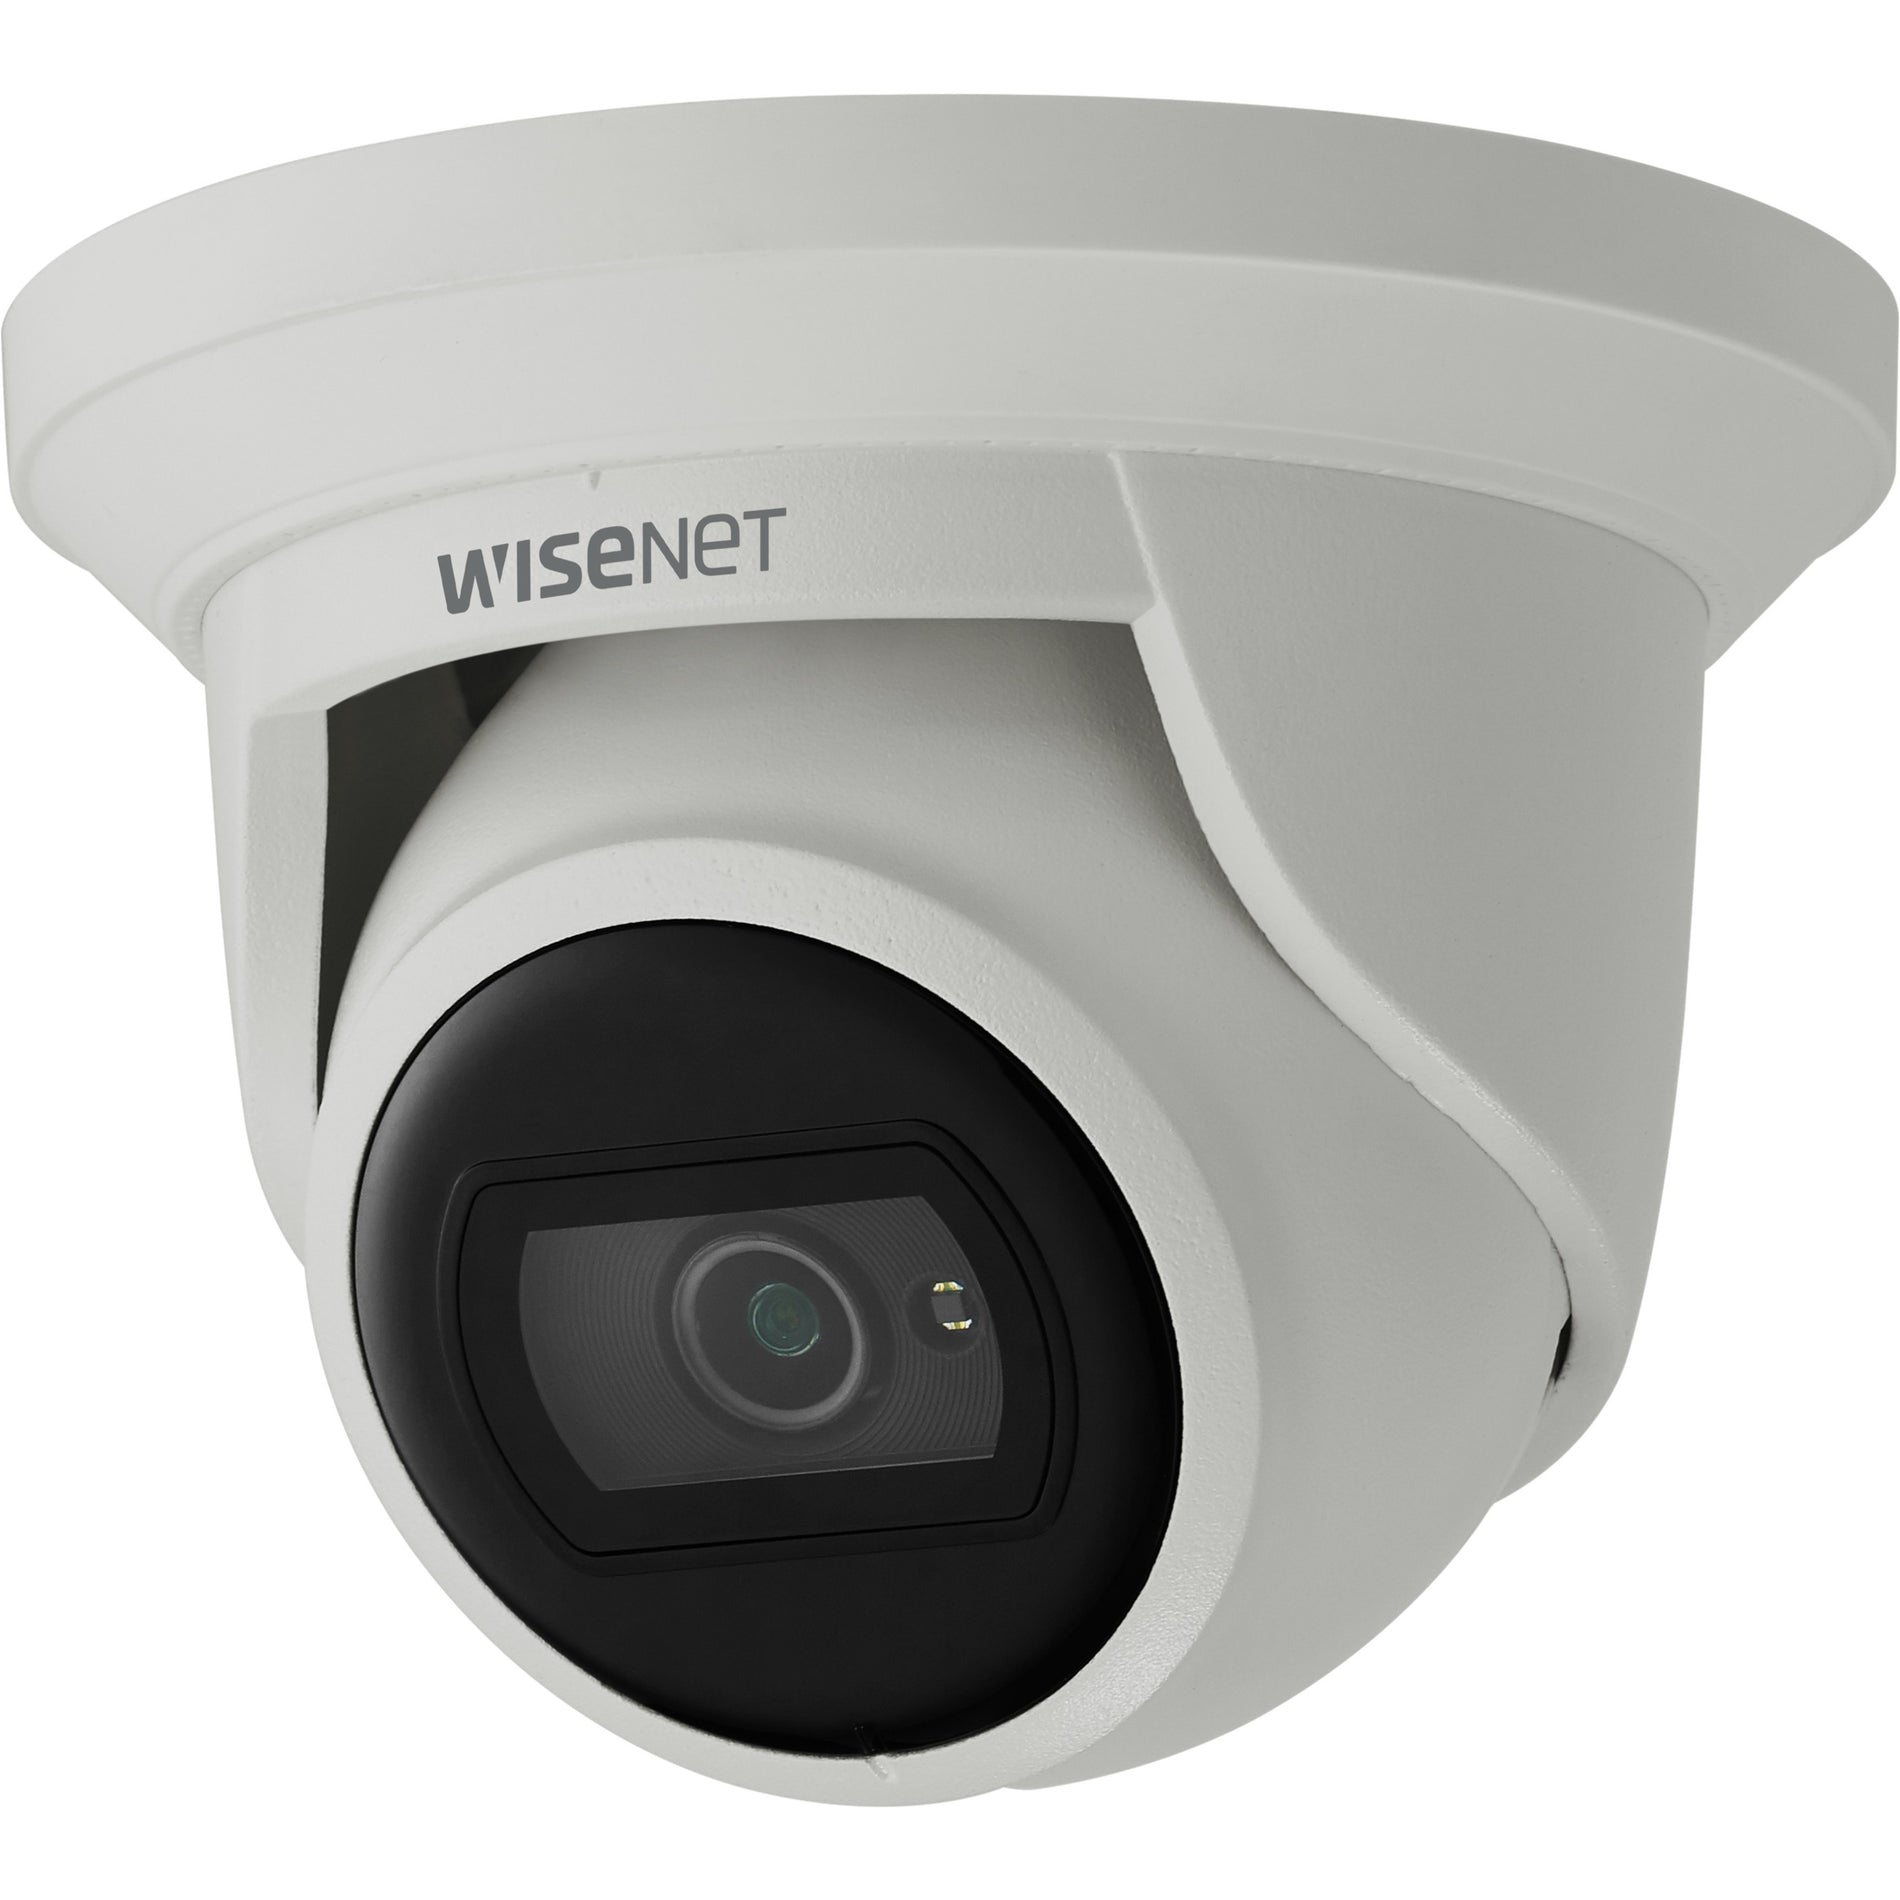 Wisenet QNE-8011R 5 MP Network IR Flateye Camera, Outdoor Dome, Color, Motion Detection, SD Card Local Storage